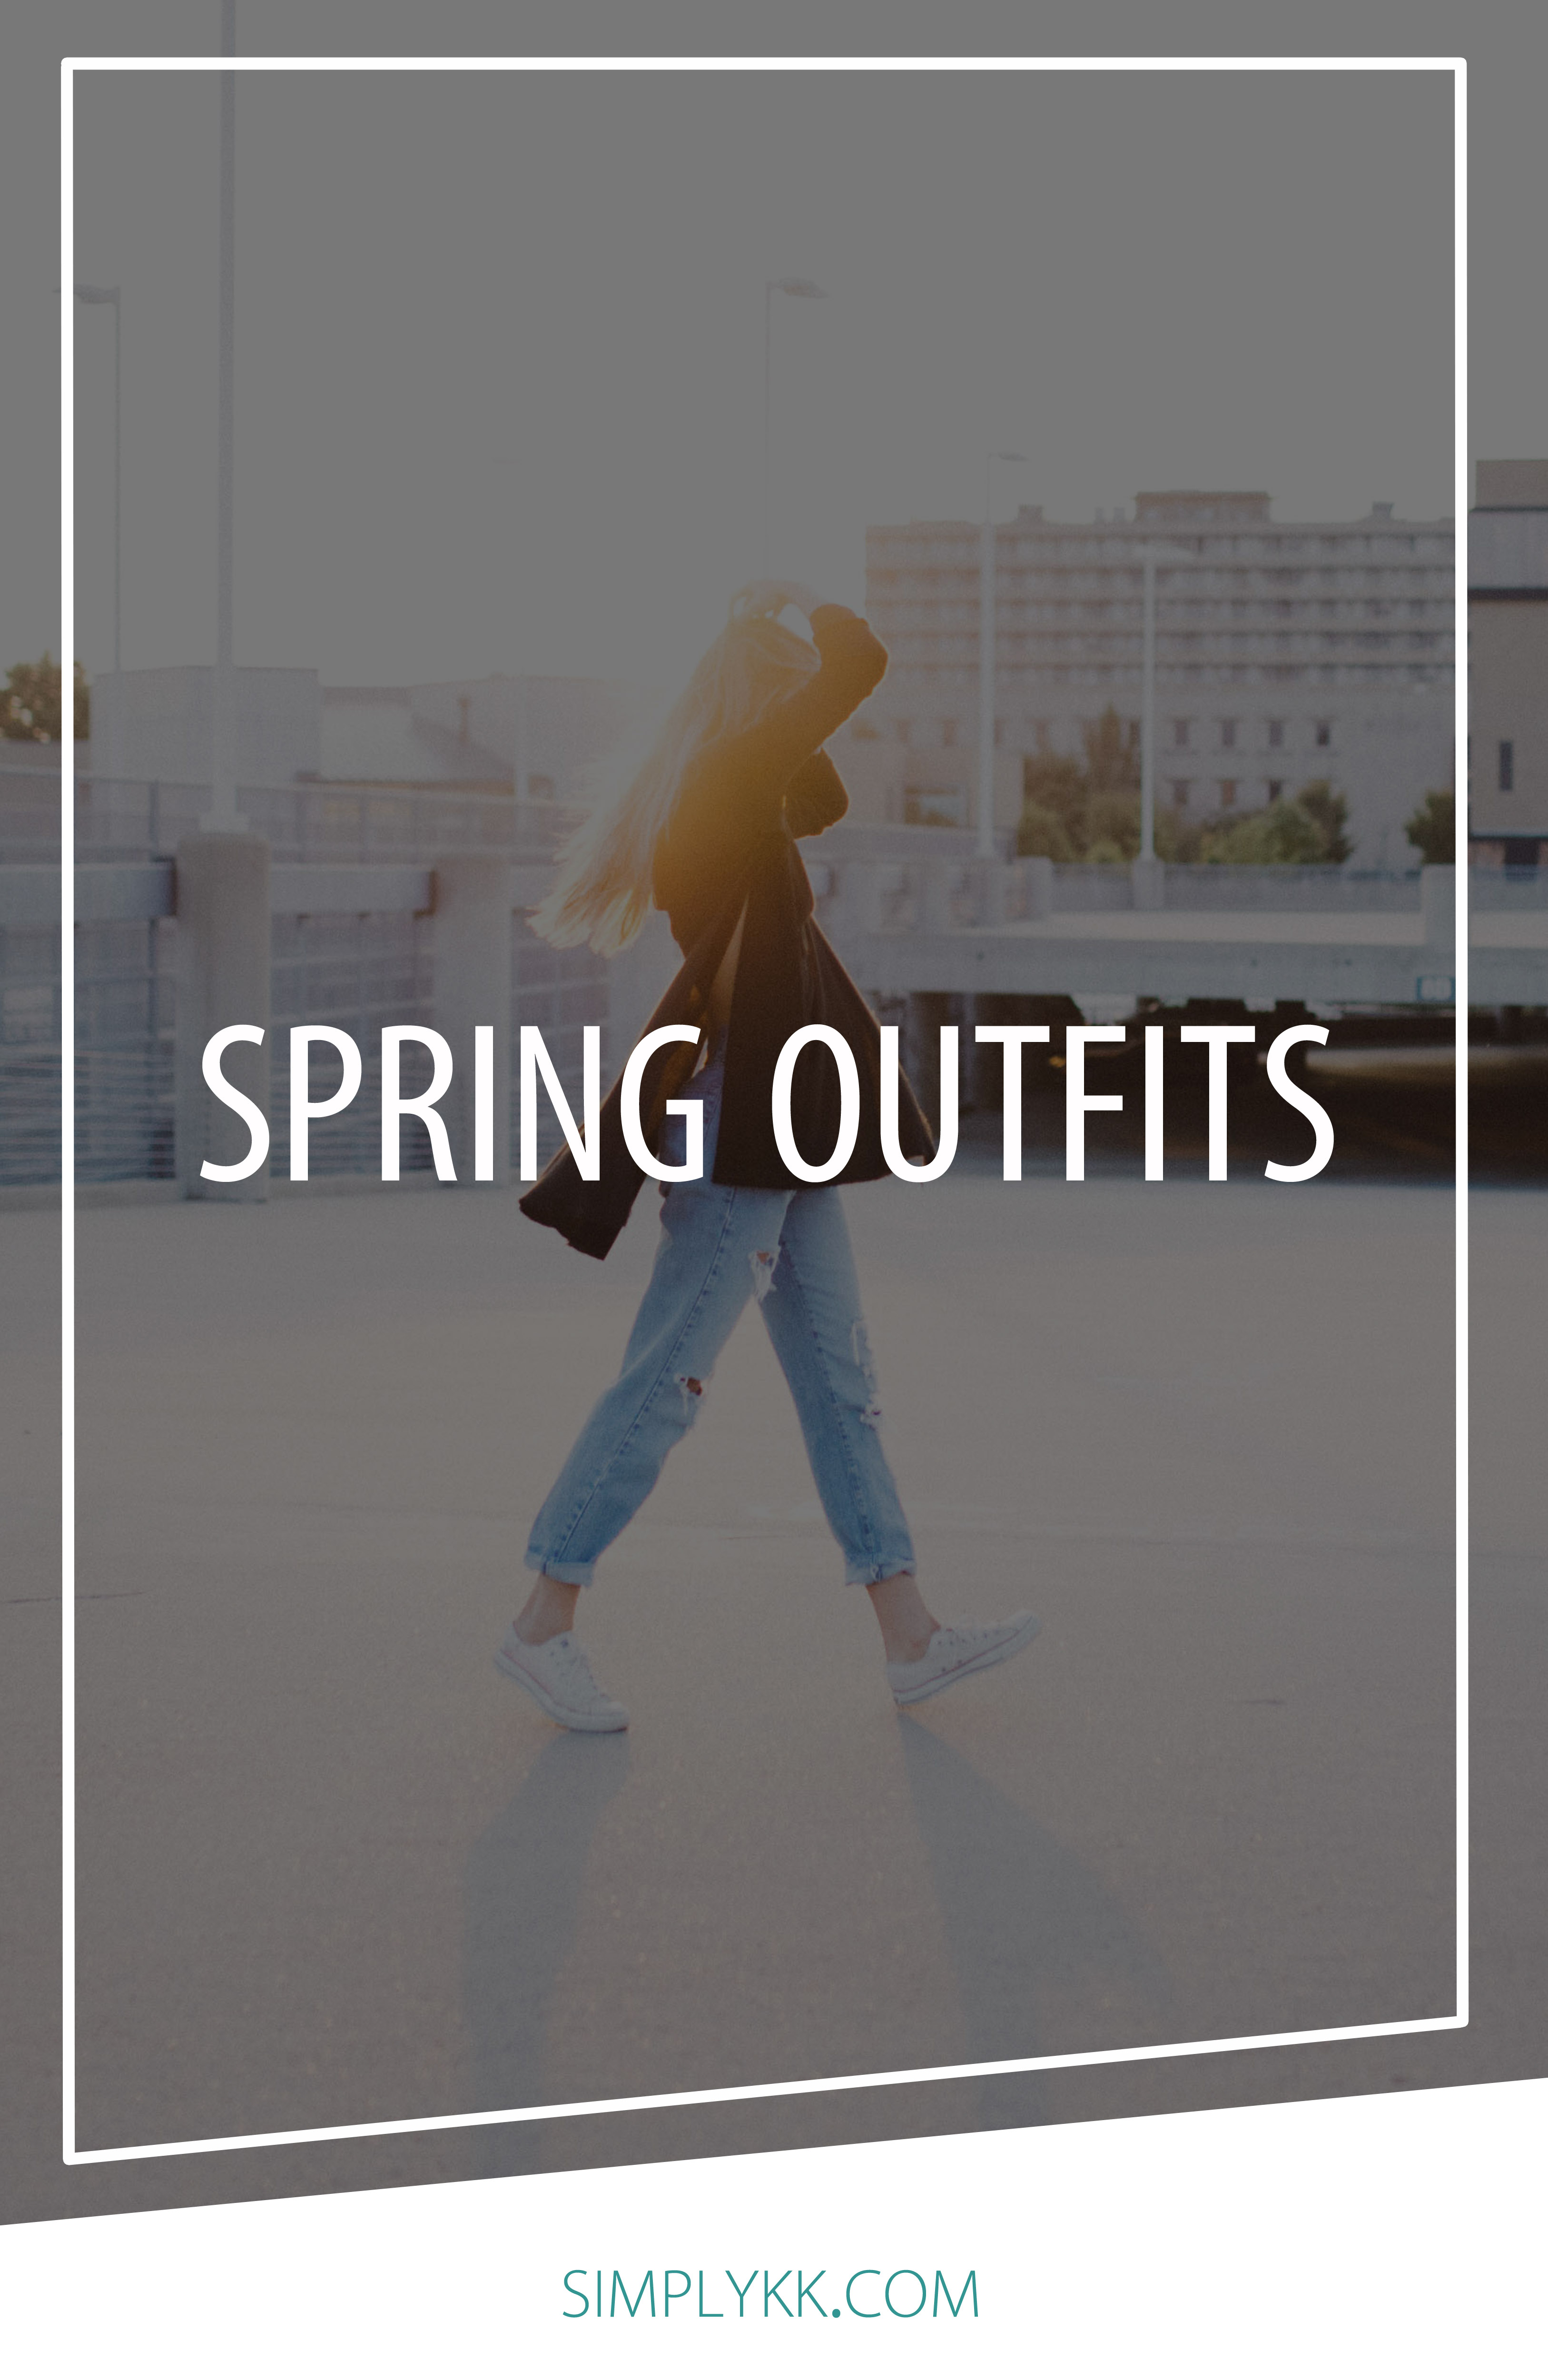 Spring Outfits: 3 looks to inspire you this season